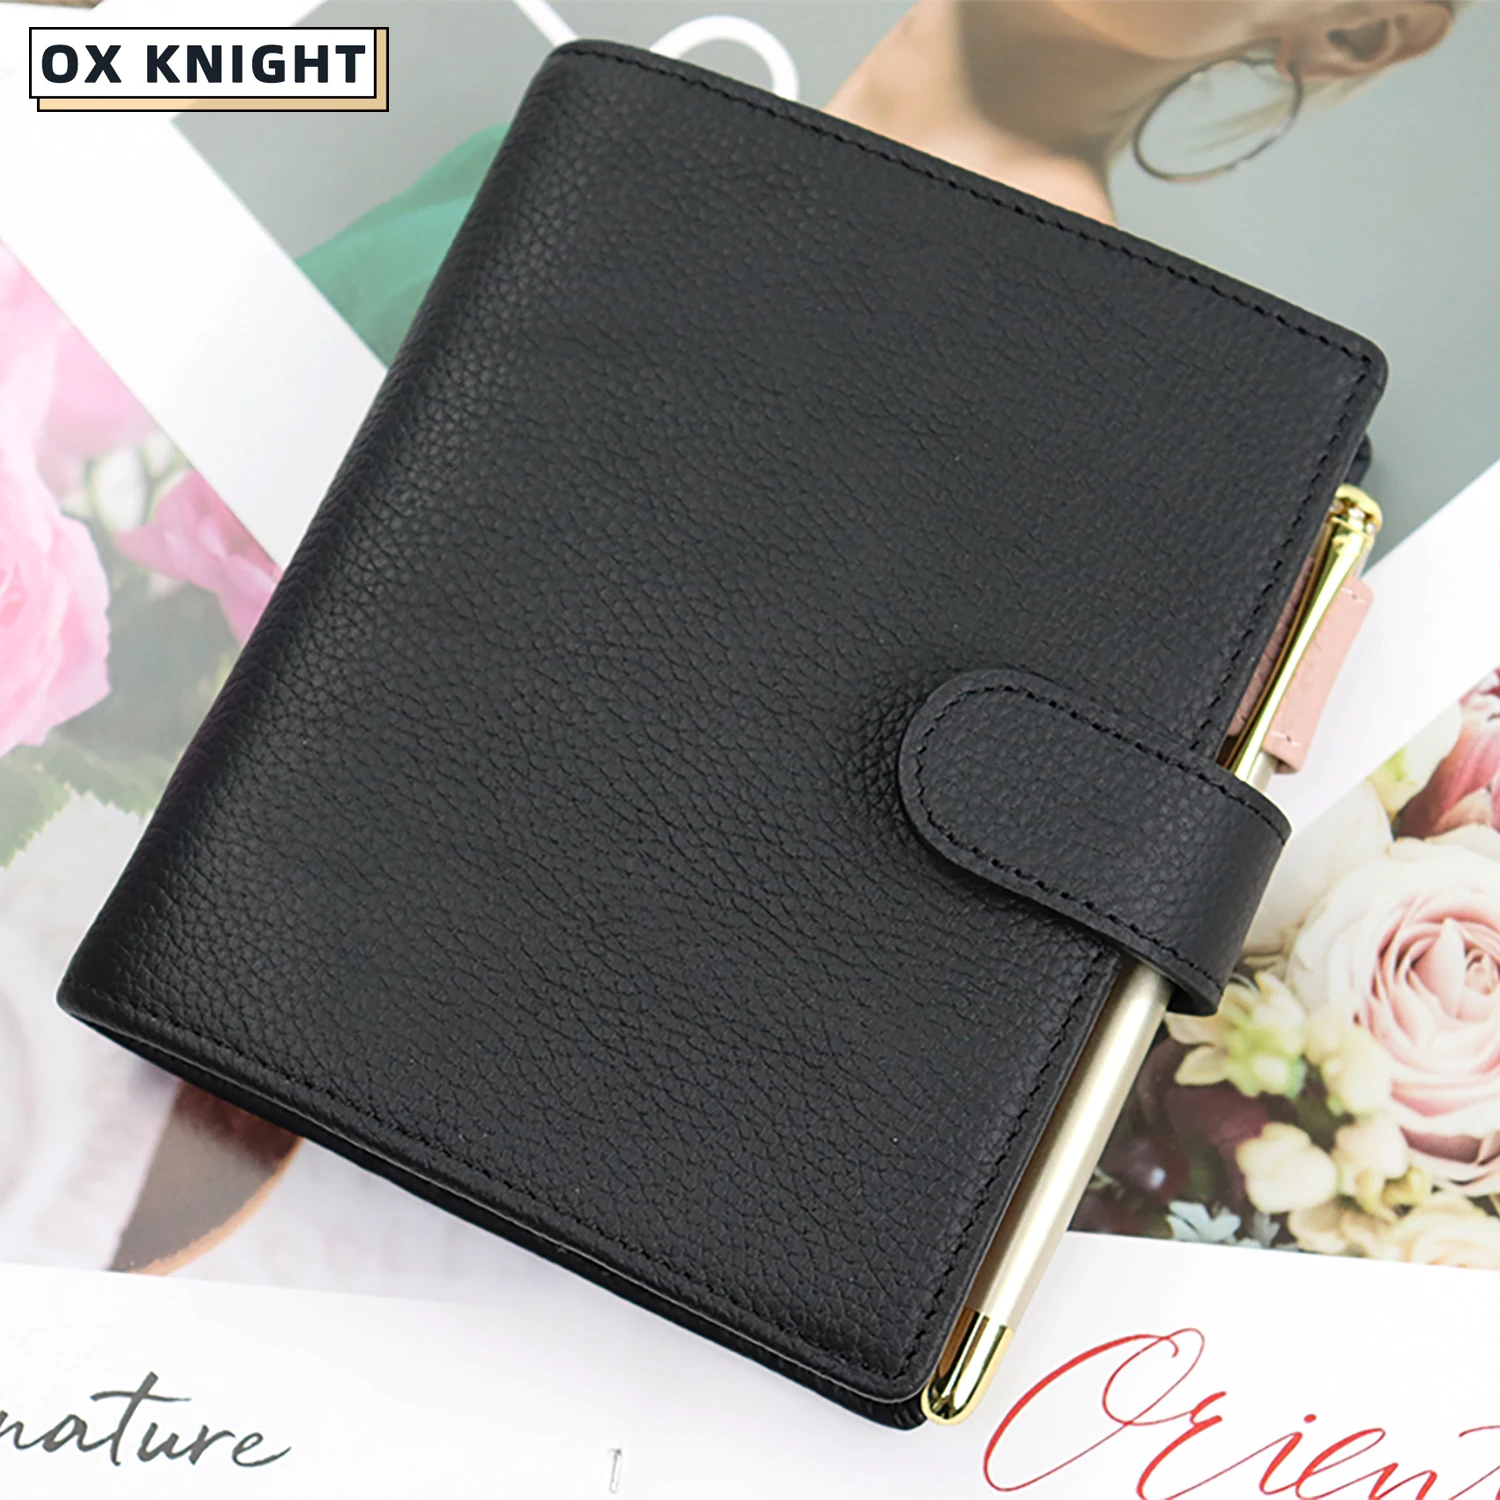 OX KNIGHT Leather Journal Notebook Planner Book Cover Pebbled Style Companion Travel Journal With 25MM Ring Organizer